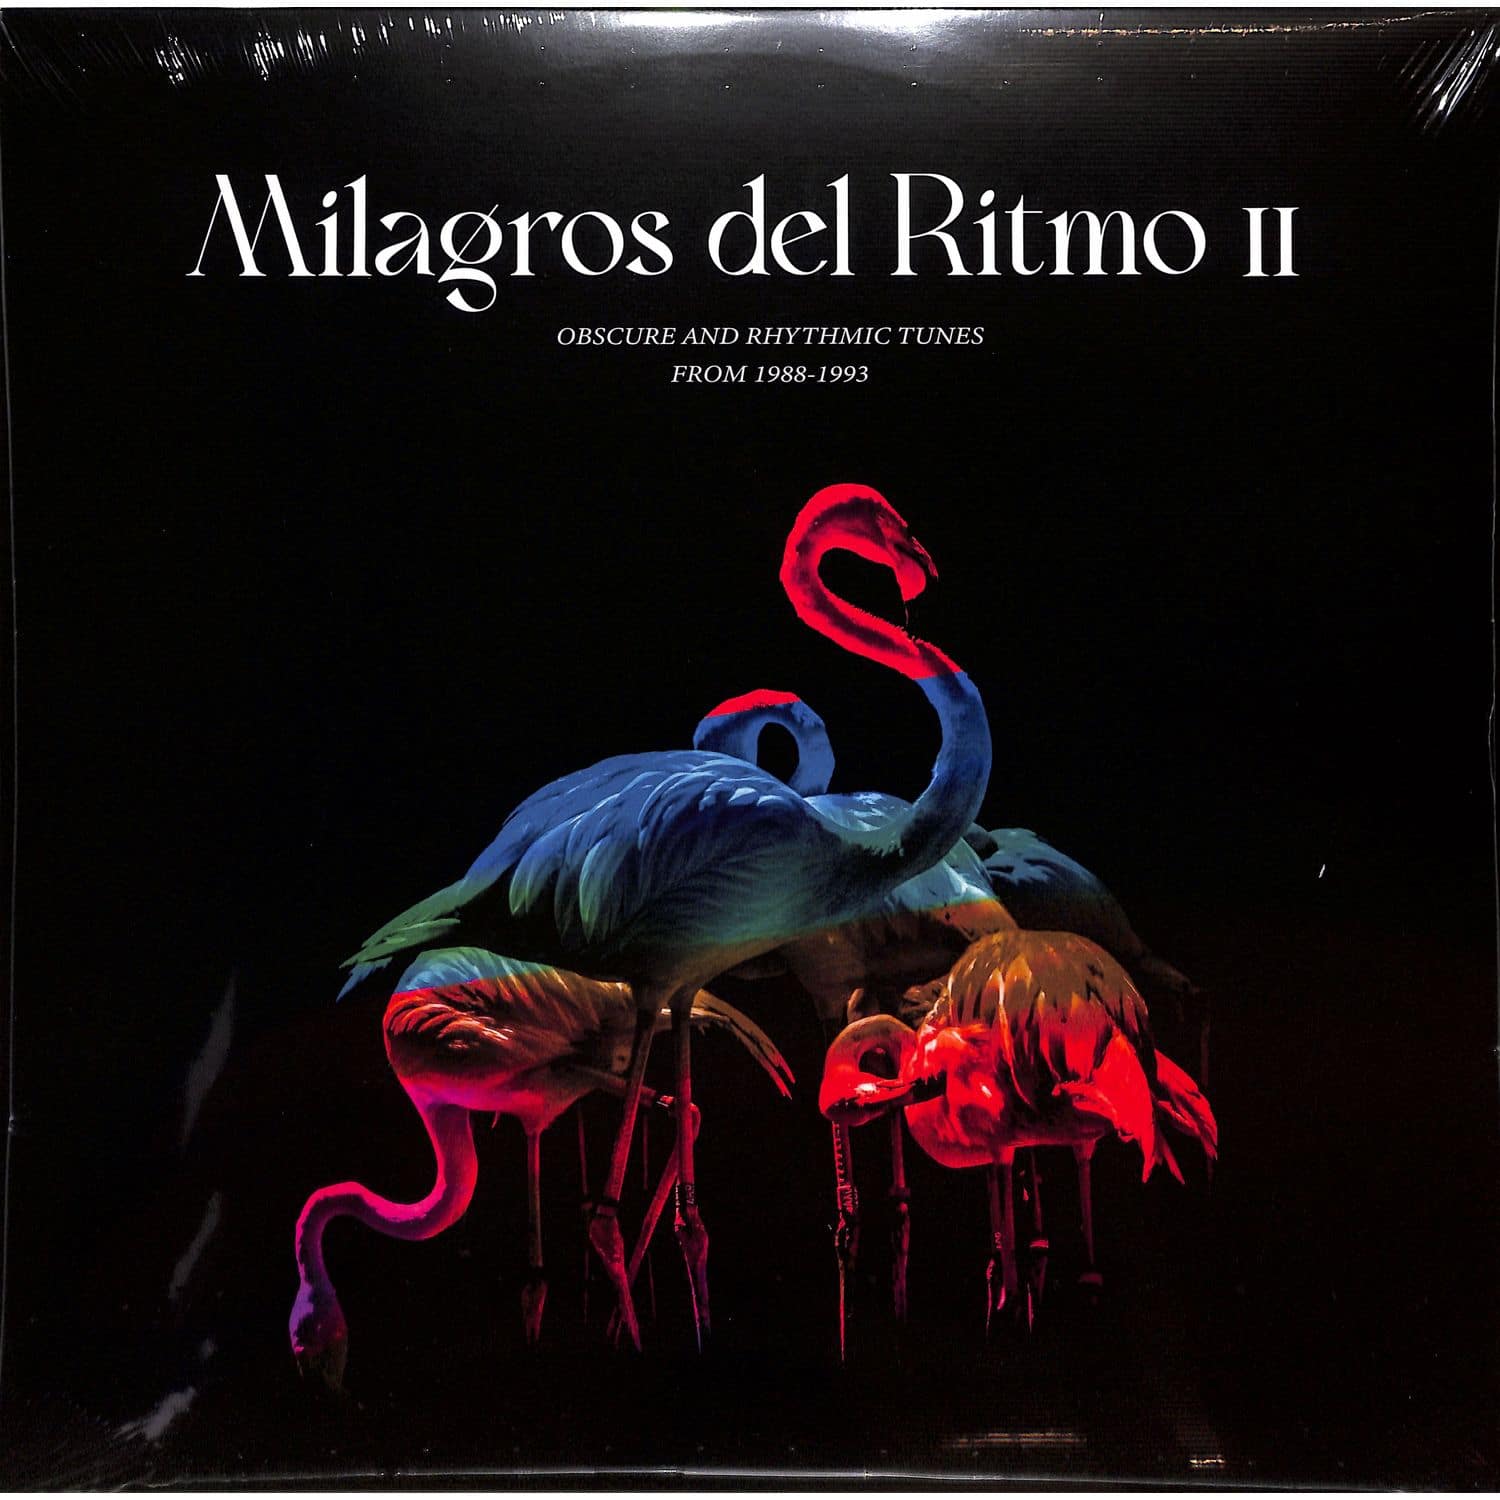 Jose Manuel presents: Milagros Del Ritmo II - OBSCURE AND RHYTHMIC TUNES FROM 1988 1993 